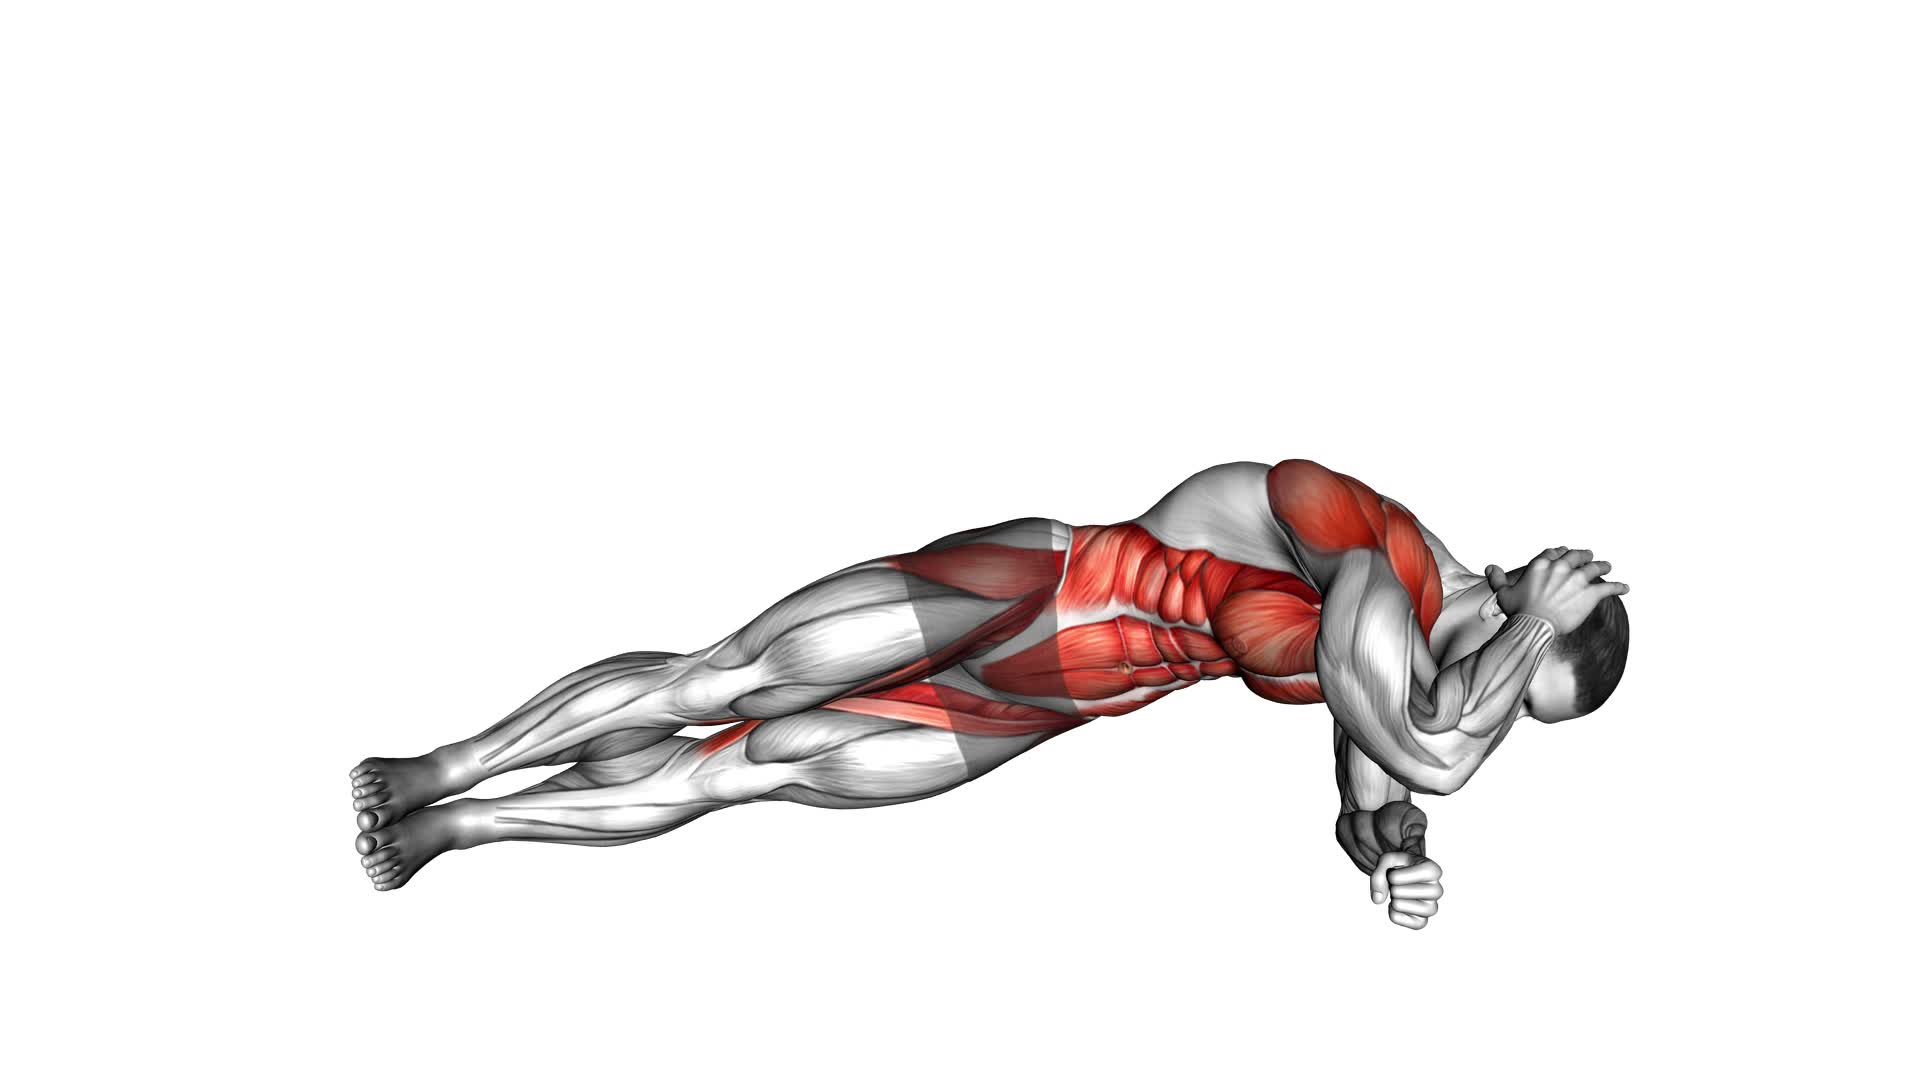 Side Plank Twist (male) - Video Exercise Guide & Tips